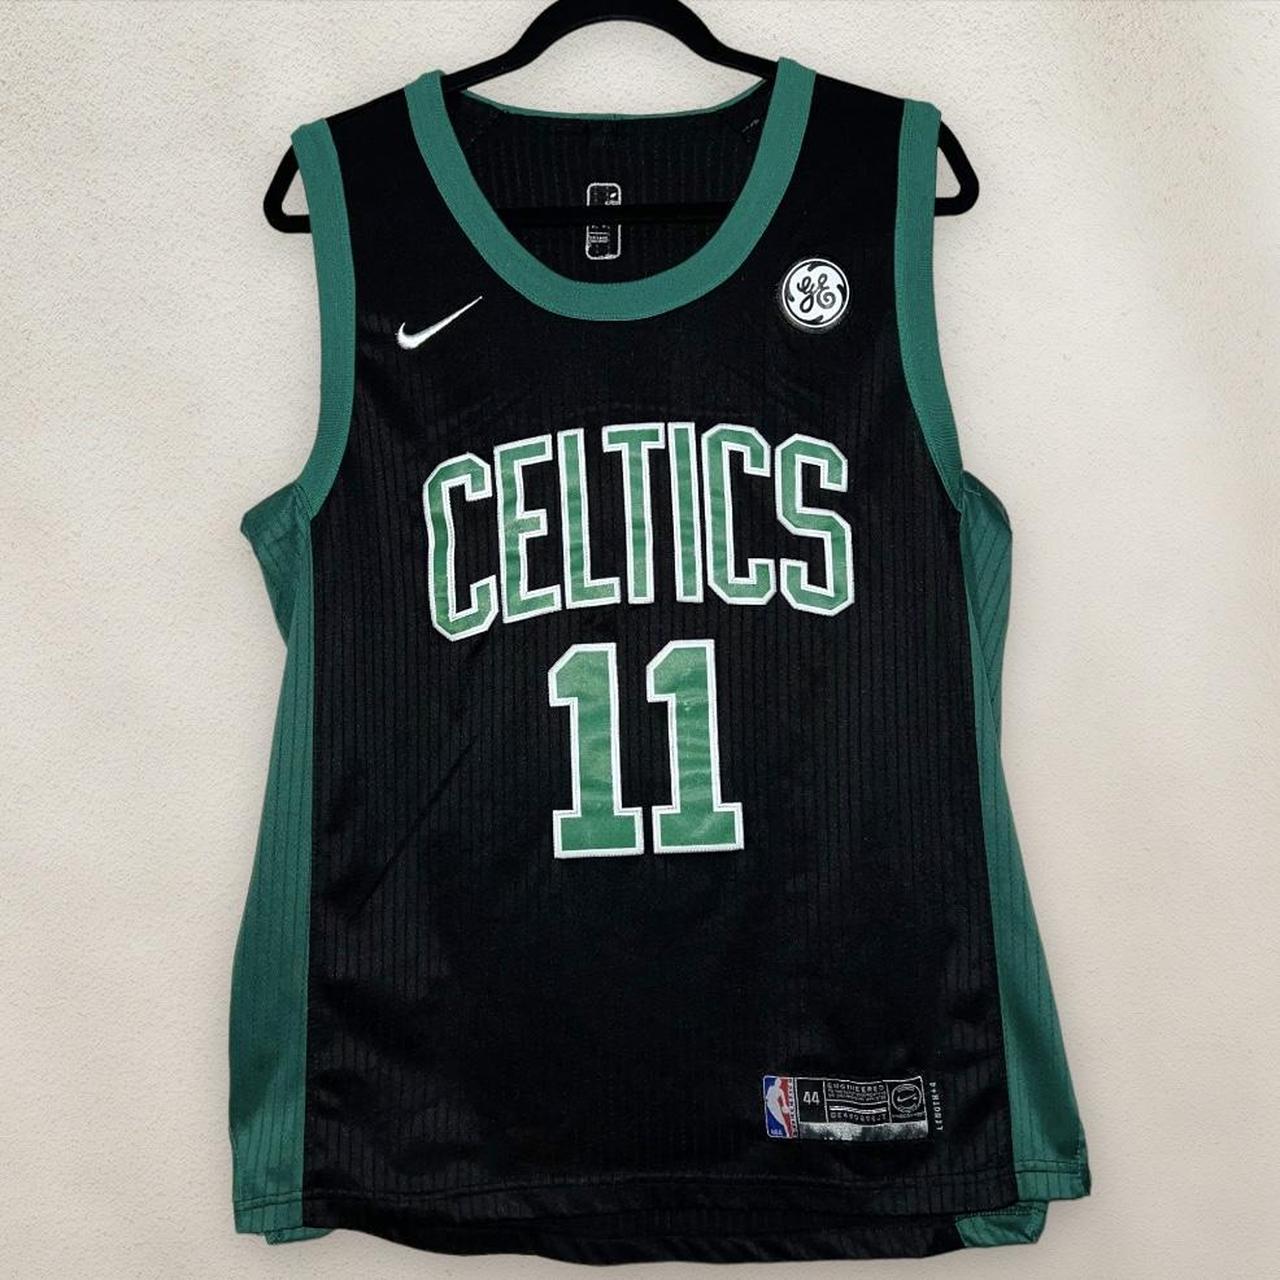 kyrie irving stitched jersey